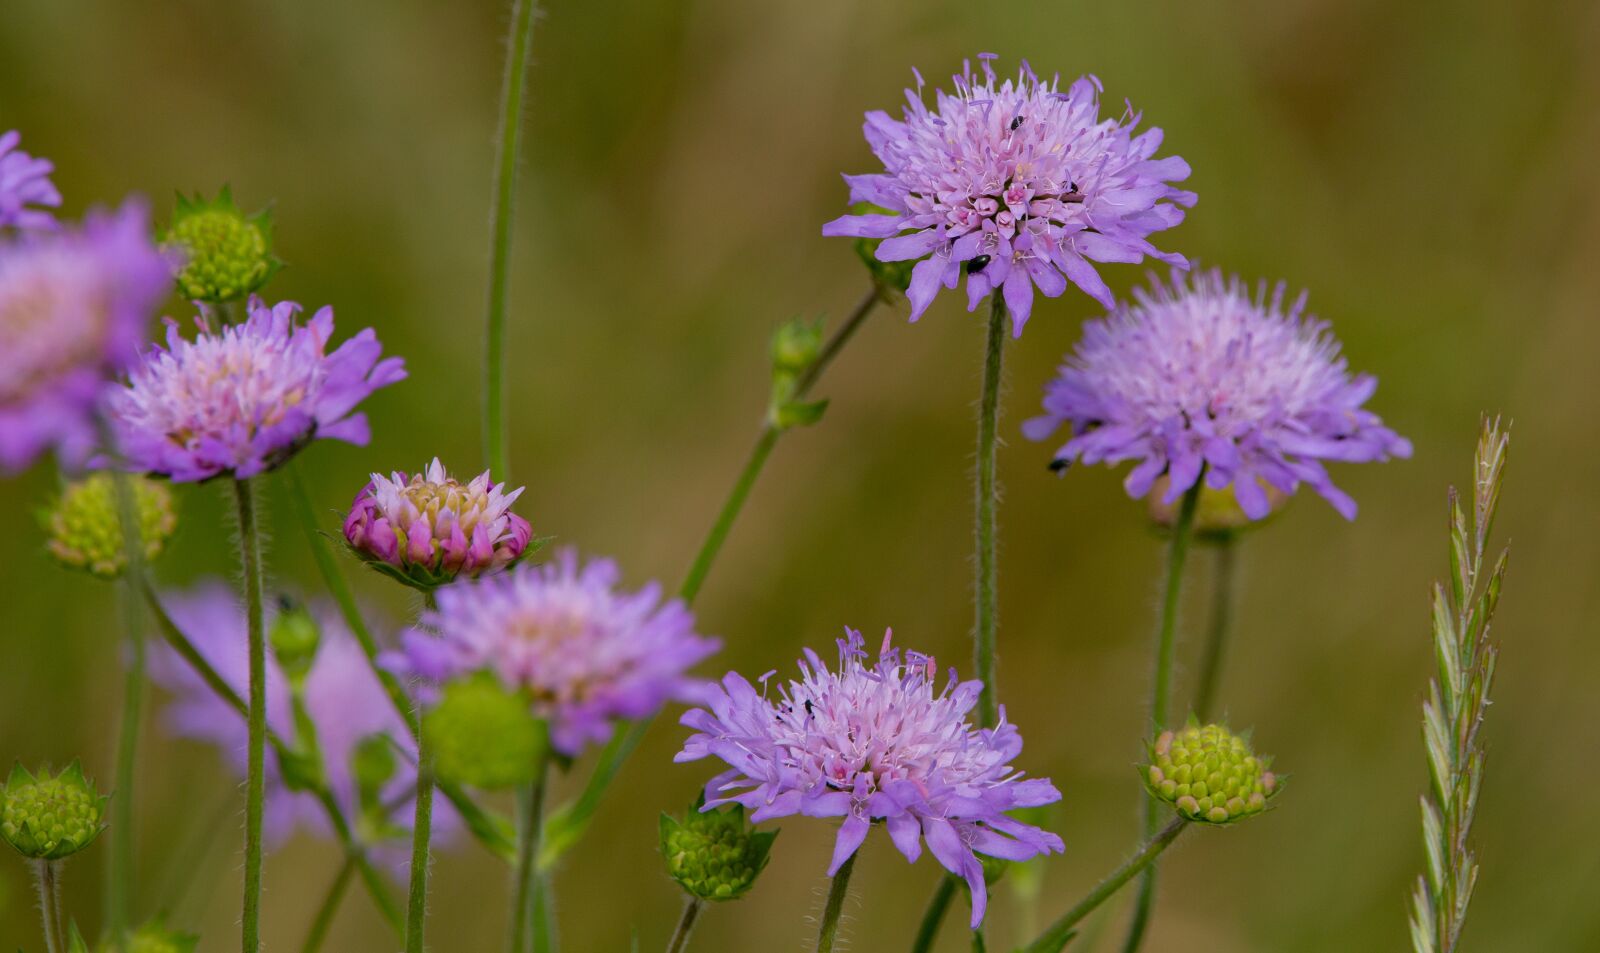 150-600mm F5-6.3 DG OS HSM | Contemporary 015 sample photo. Field scabious, knautia arvensis photography